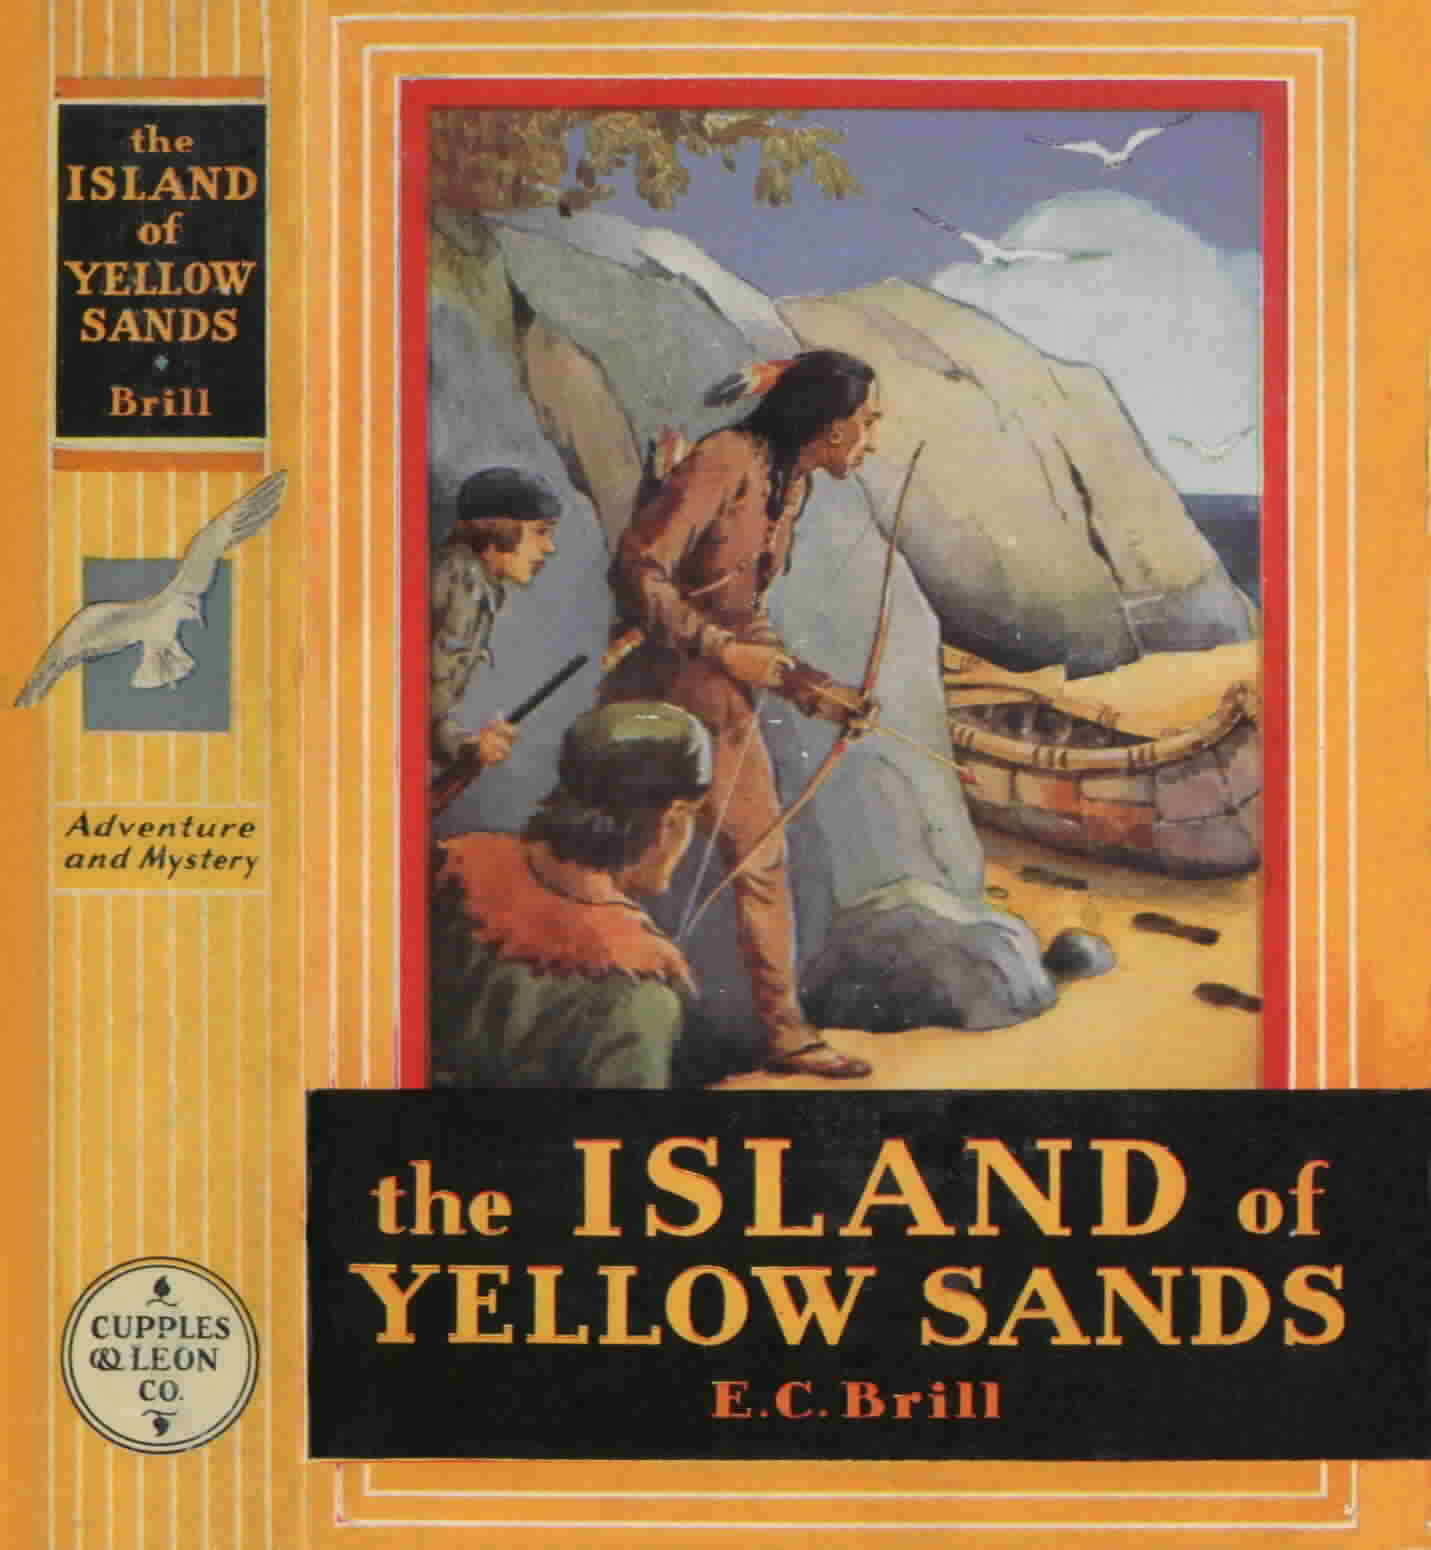 'The Island of Yellow Sands' by E. C. Brill